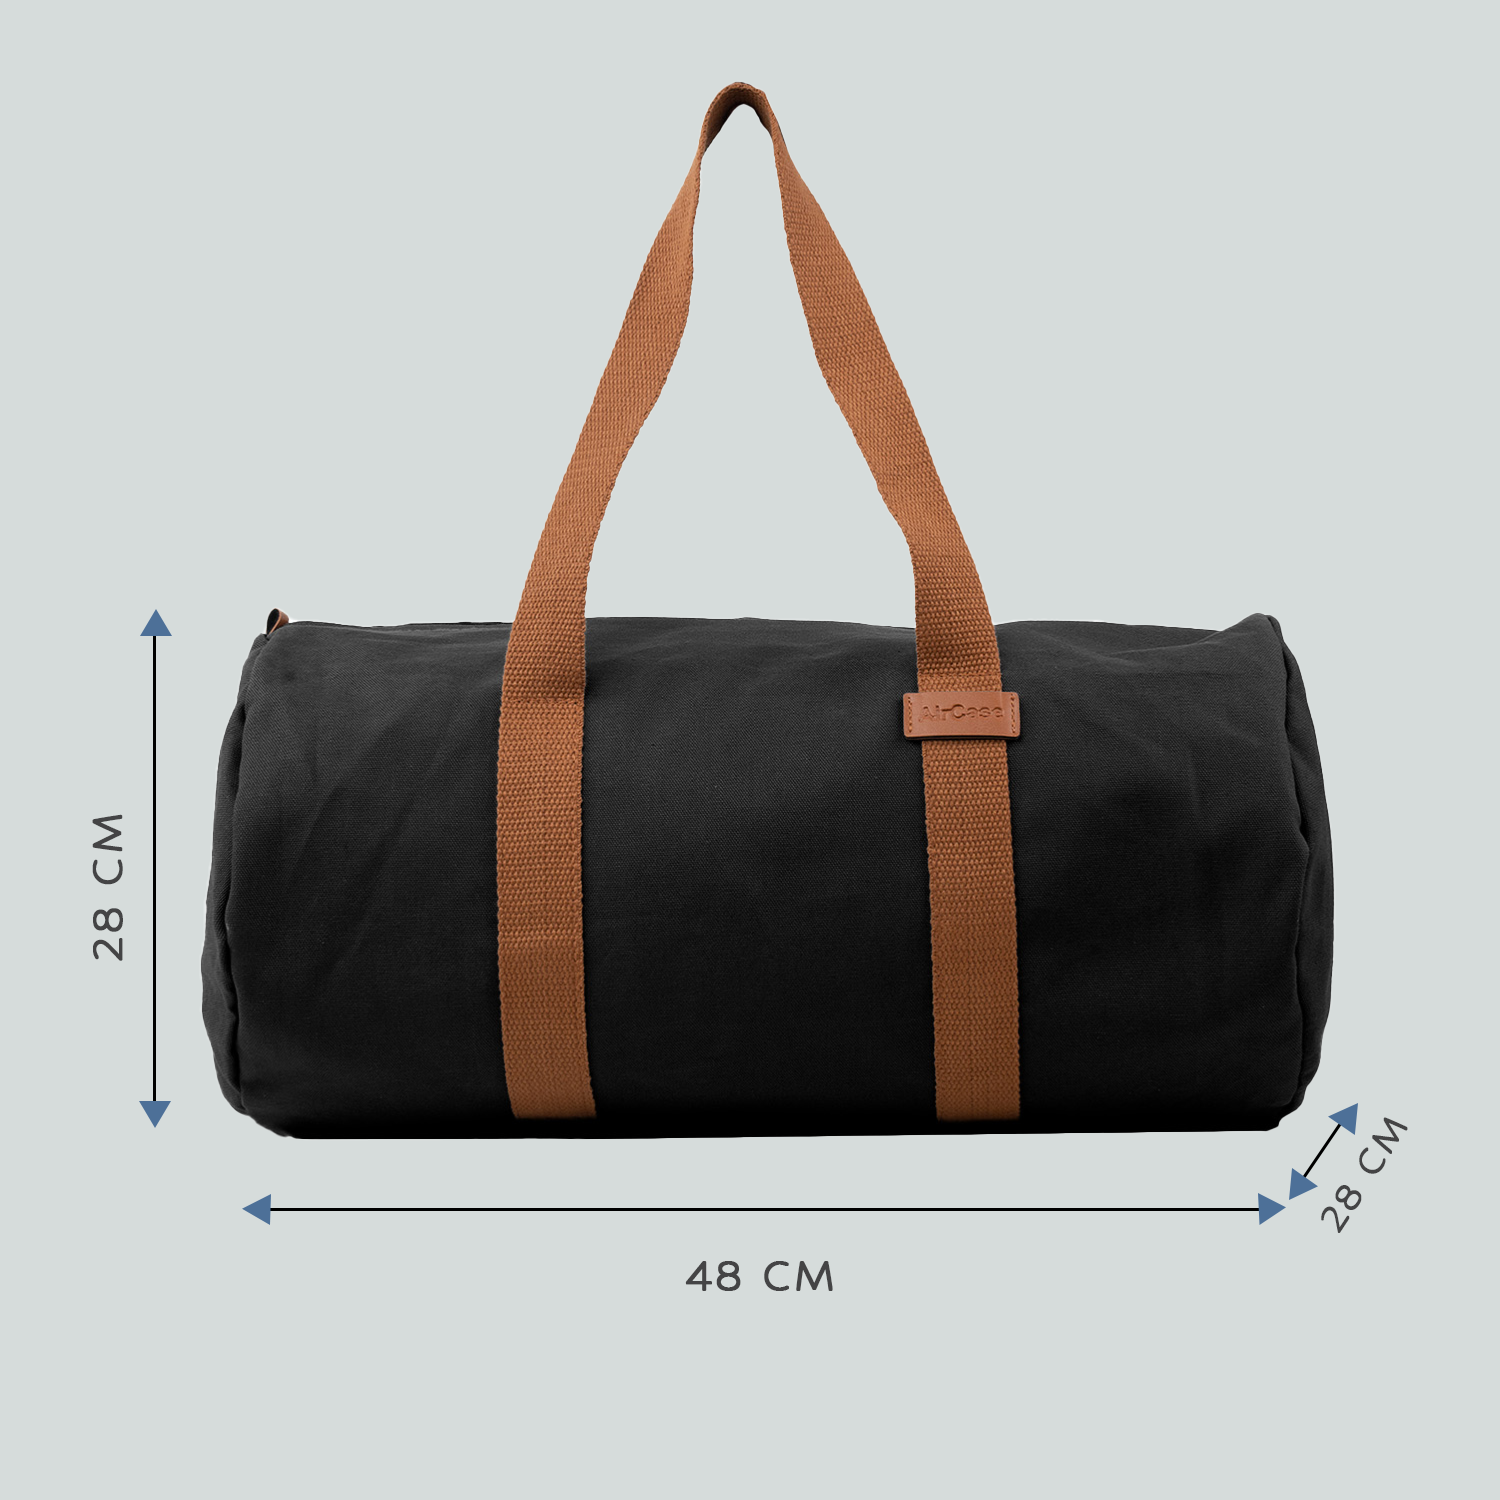 55 Liter and 24 Inch Lightweight Canvas Duffle Bags for Men  Women for  Traveling The Gym and as Sports Equipment Bag  China Sport Bag and  Travel Bag price  MadeinChinacom